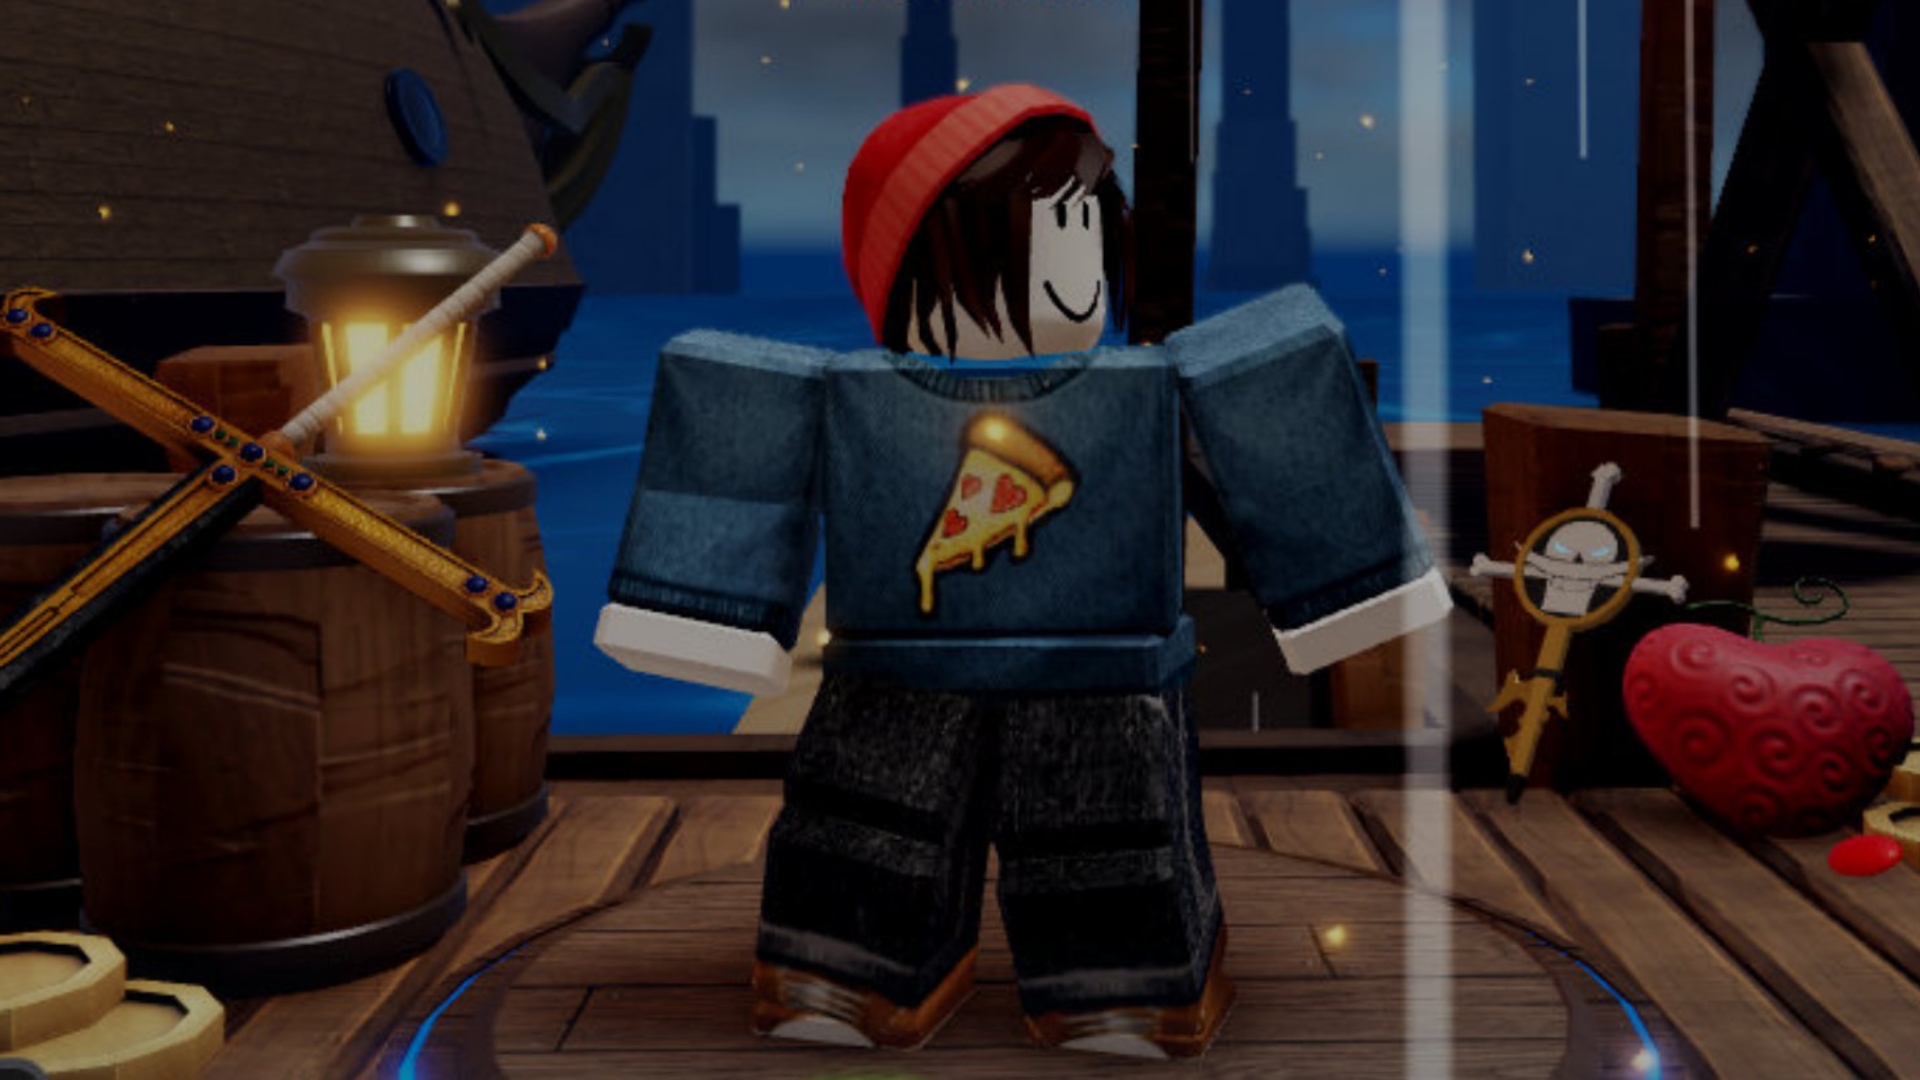 Roblox One Piece: Every Available Code (September 2022)